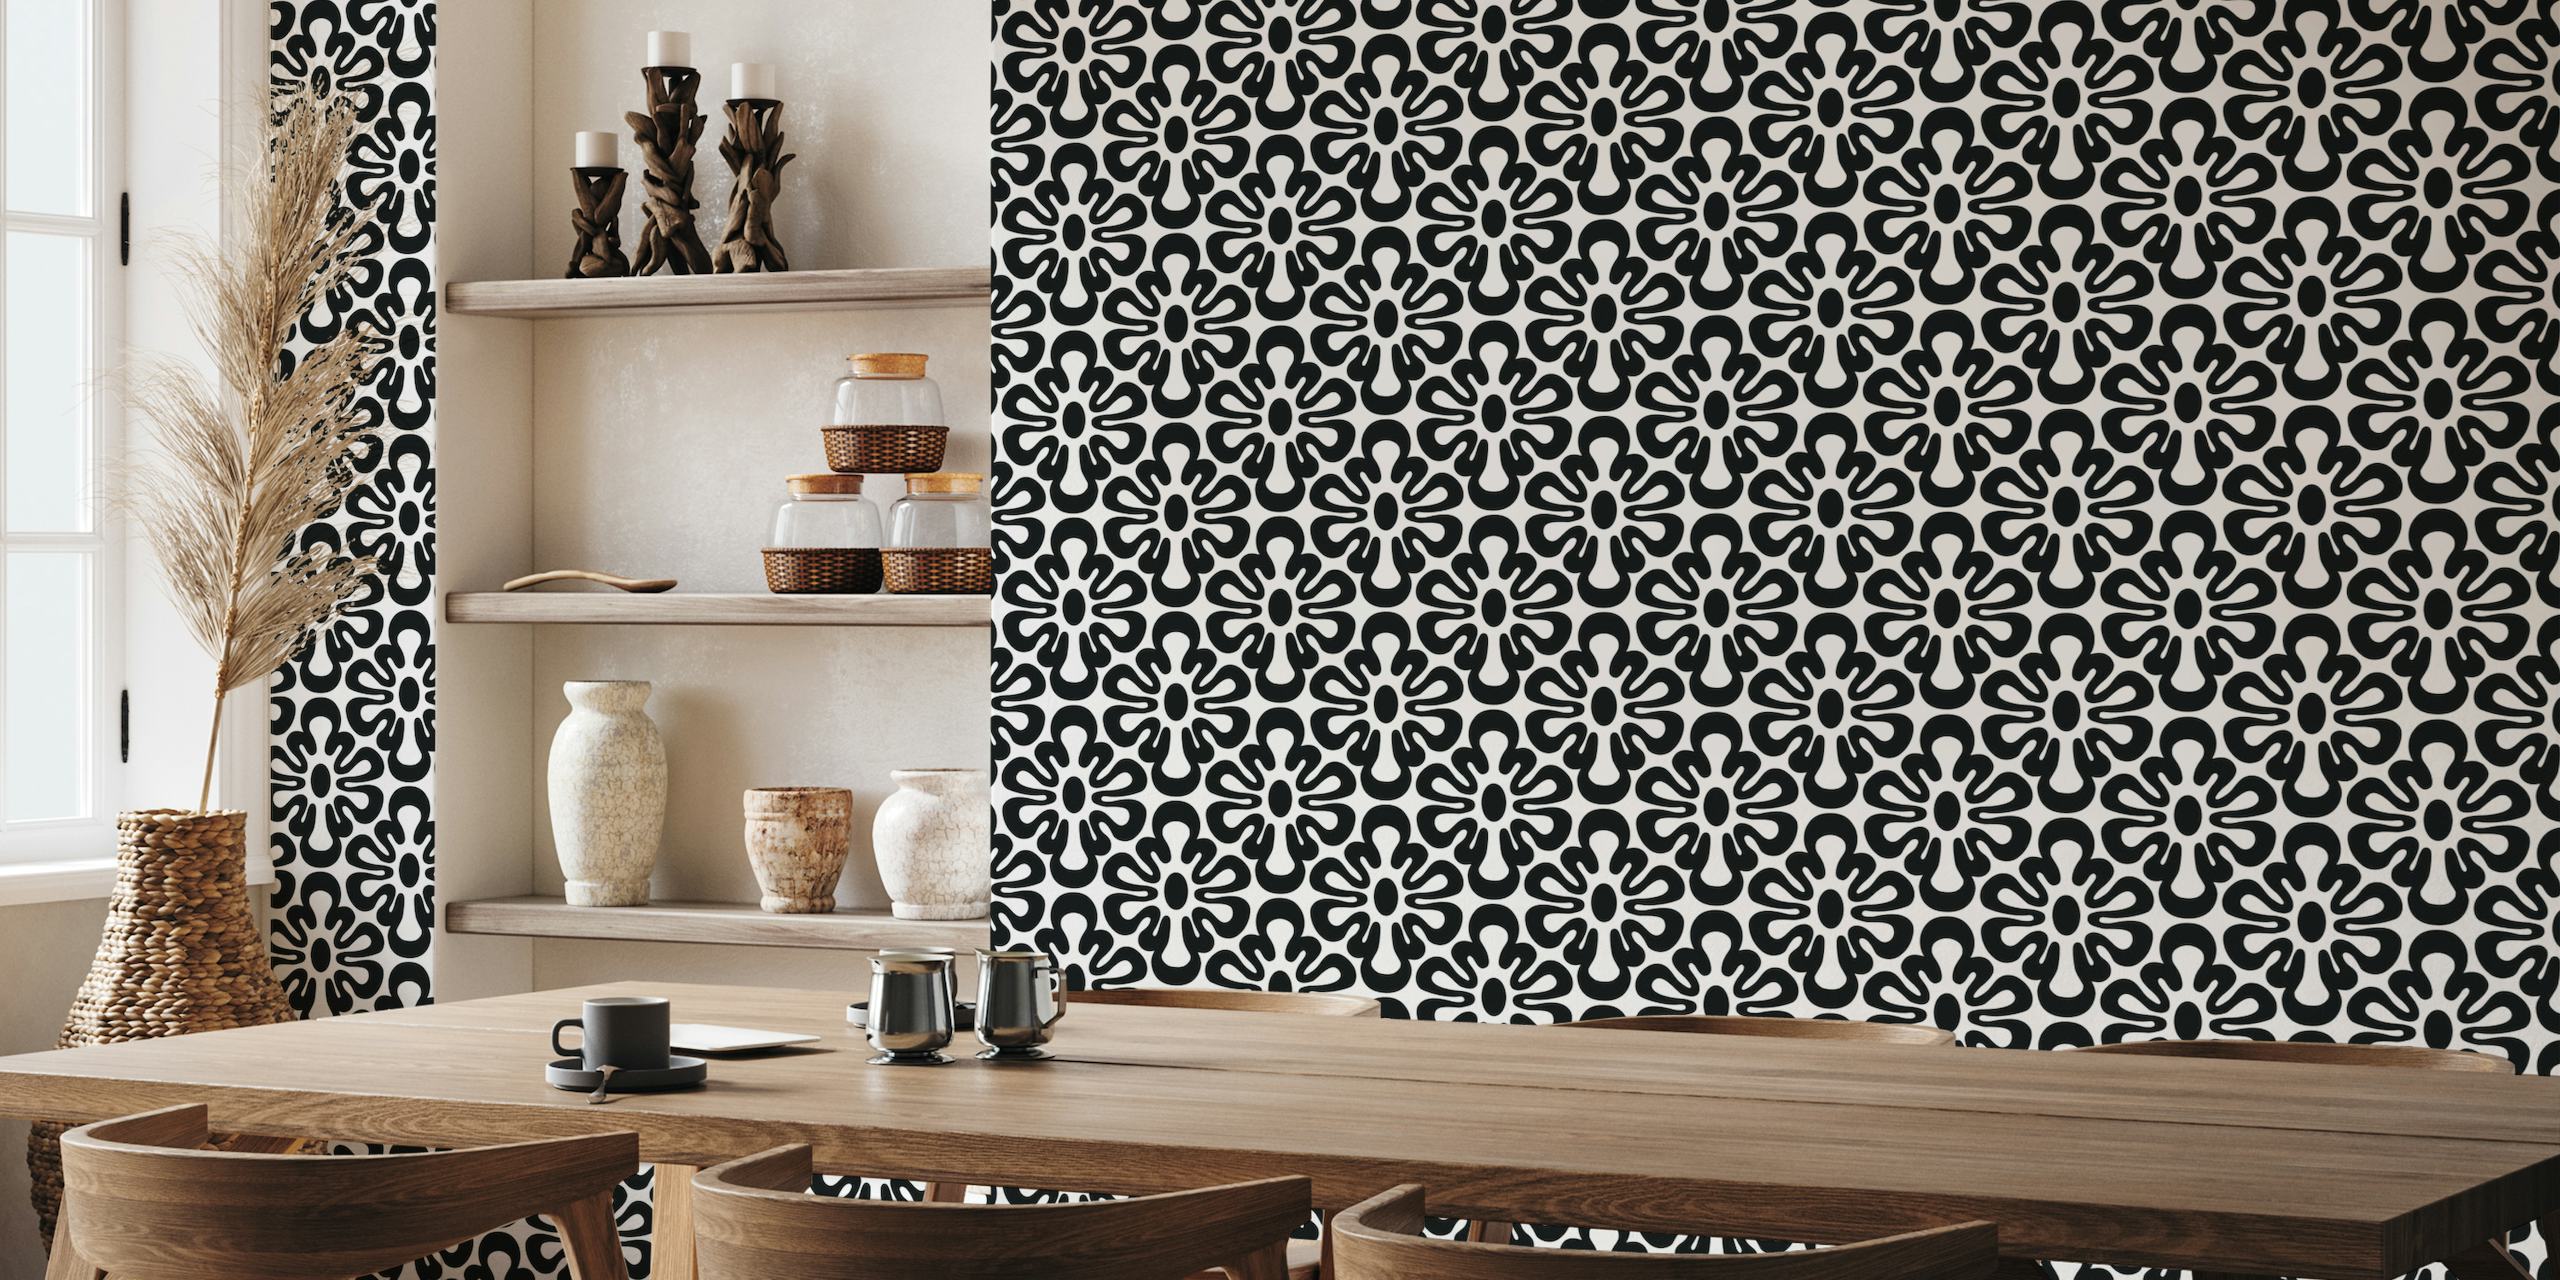 2625 D - abstract shapes pattern, black and white papel de parede